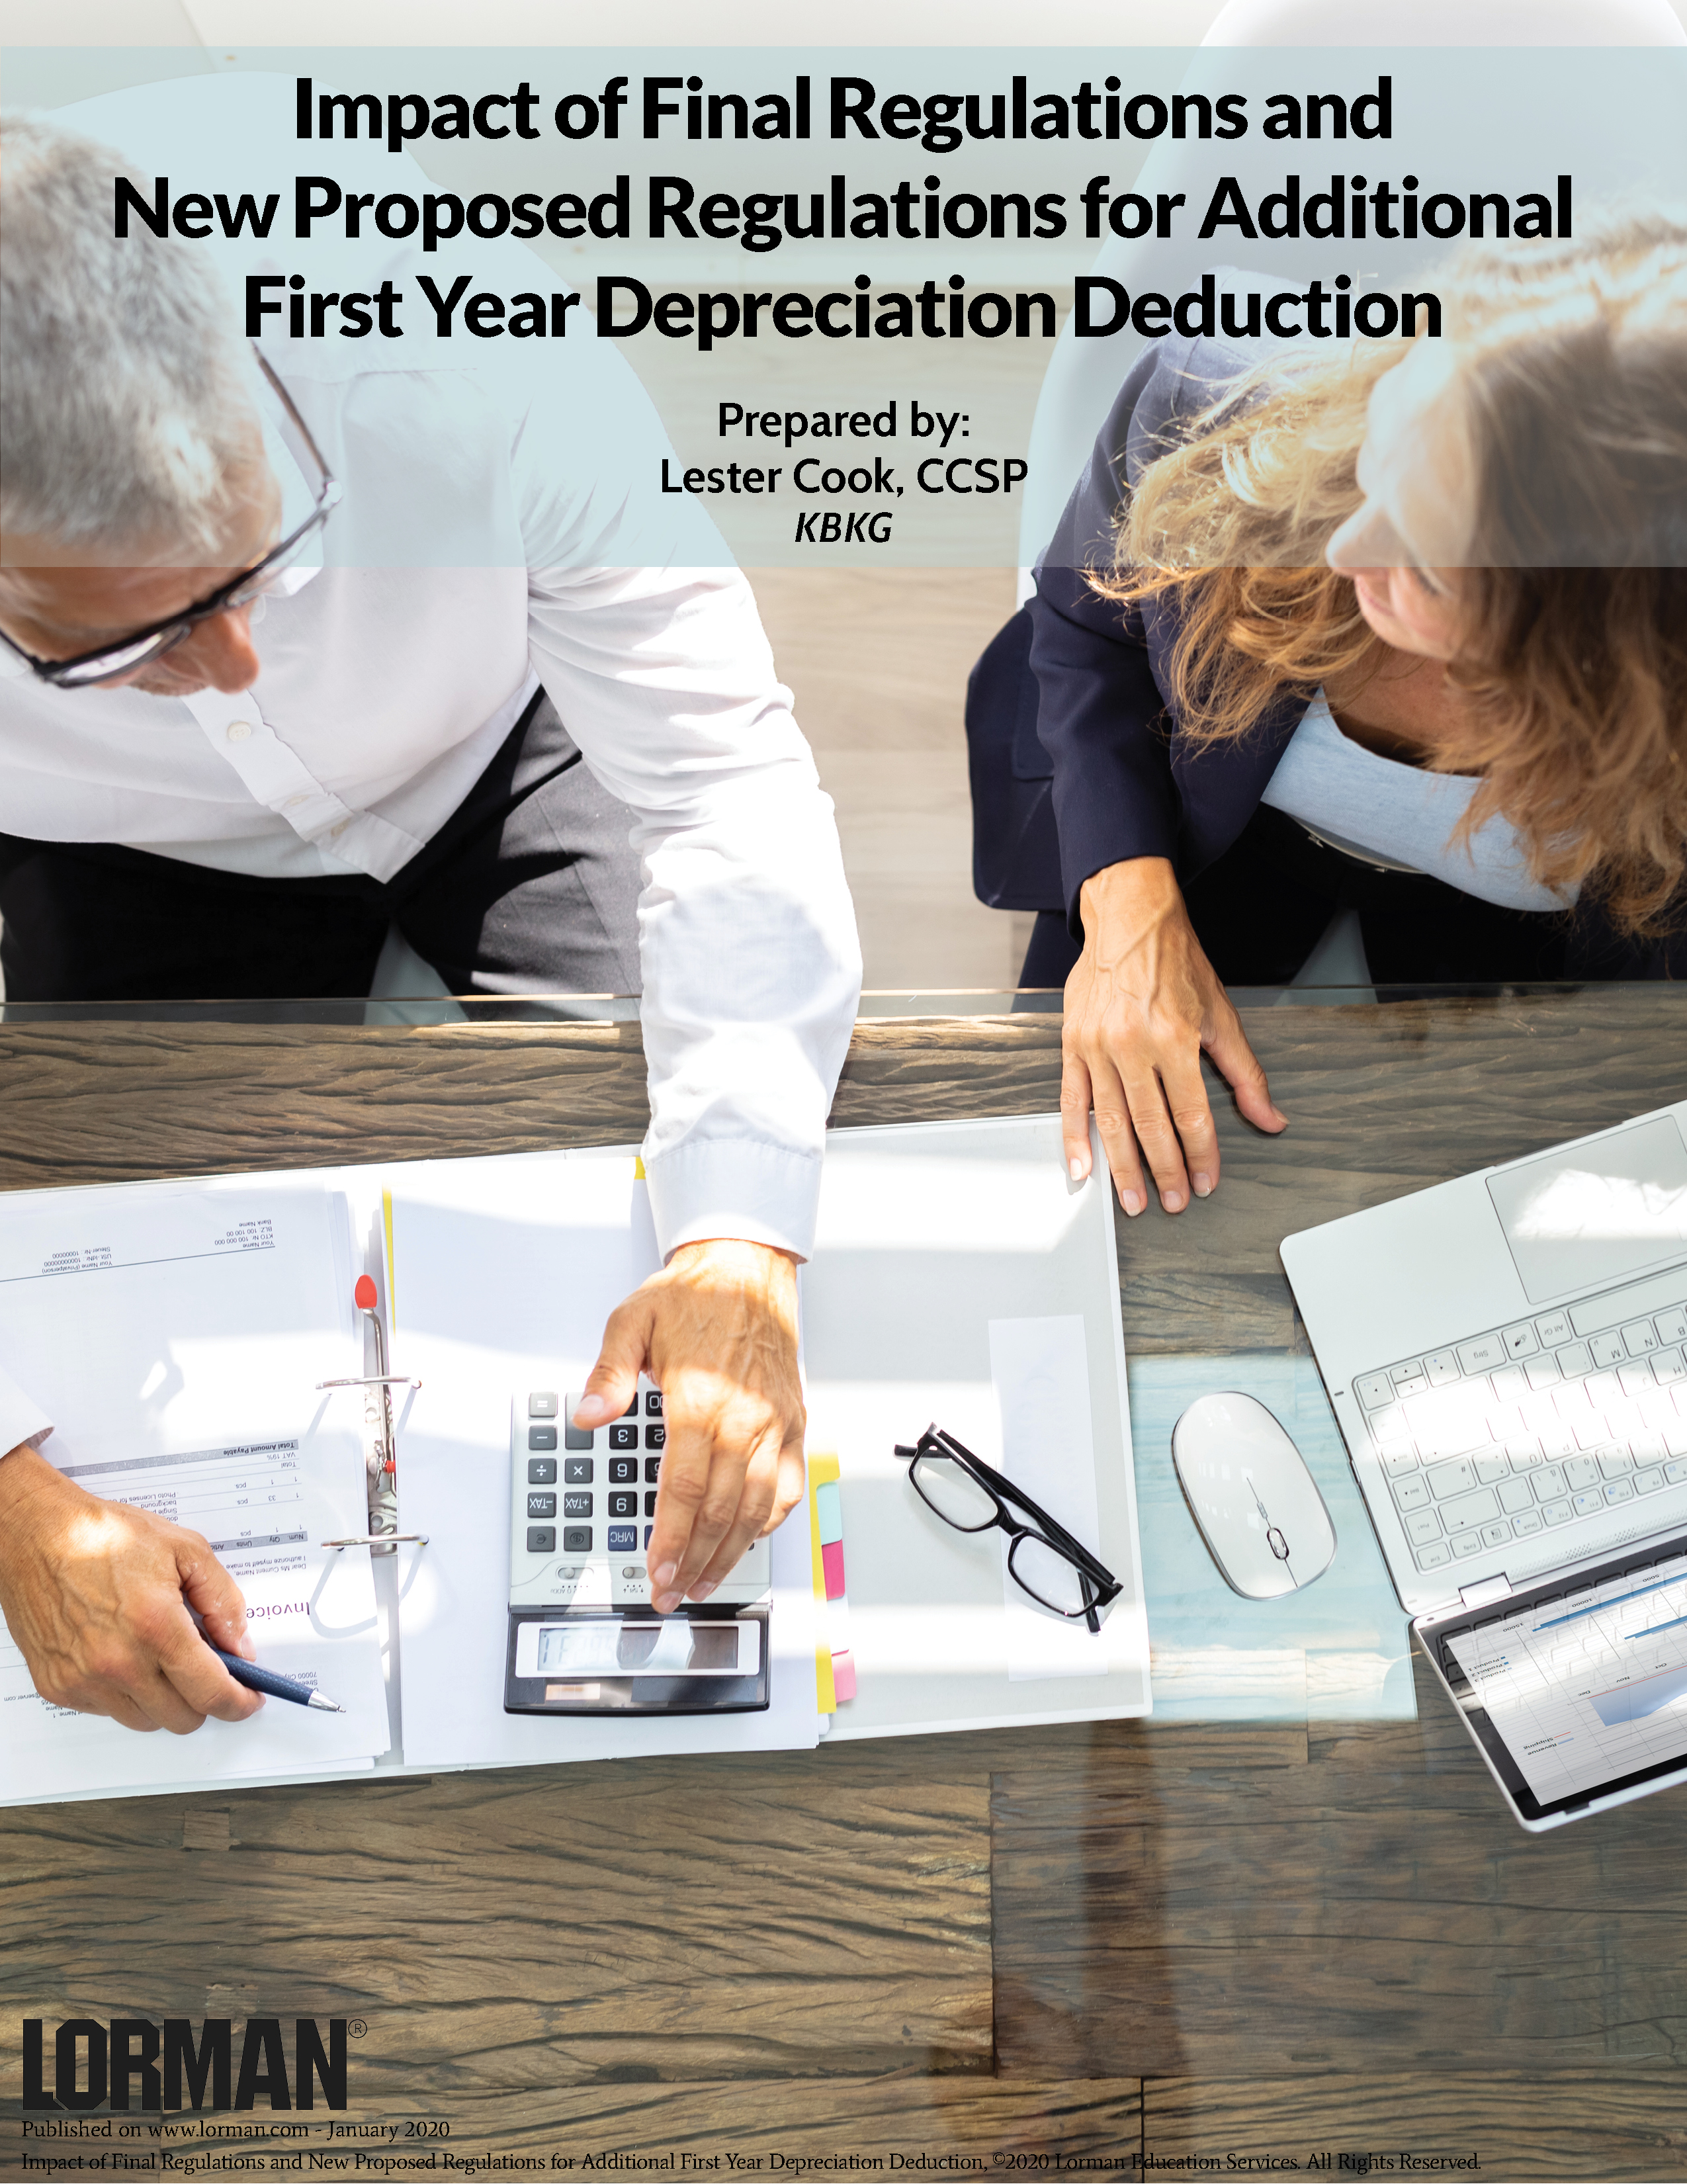 Impact of Final Regulations & Proposed Regulations for Additional First Year Depreciation Deduction